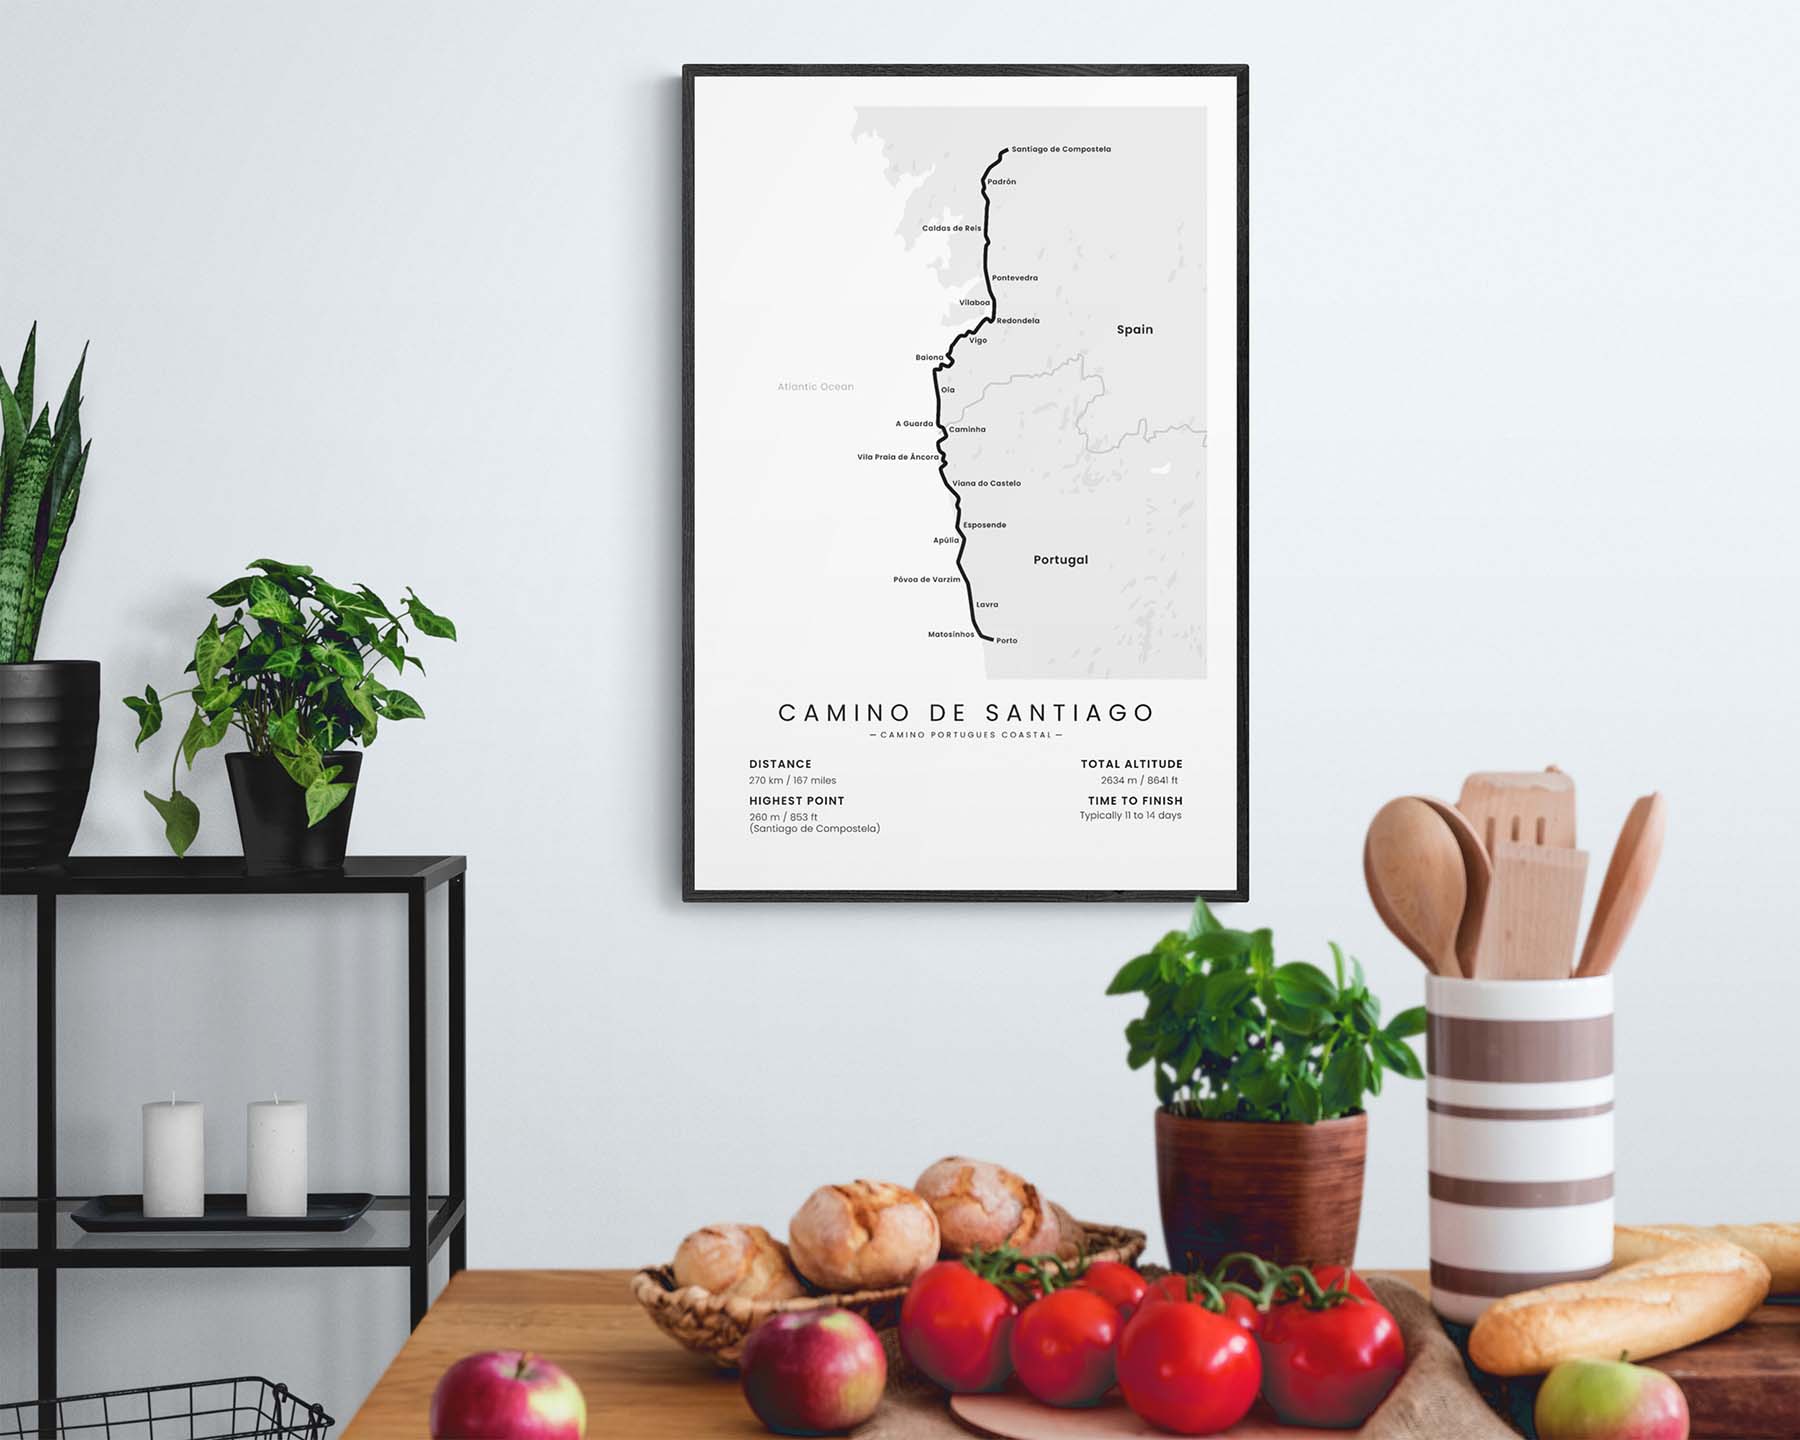 The Coastal Way (Pyrenees) route in minimal room decor